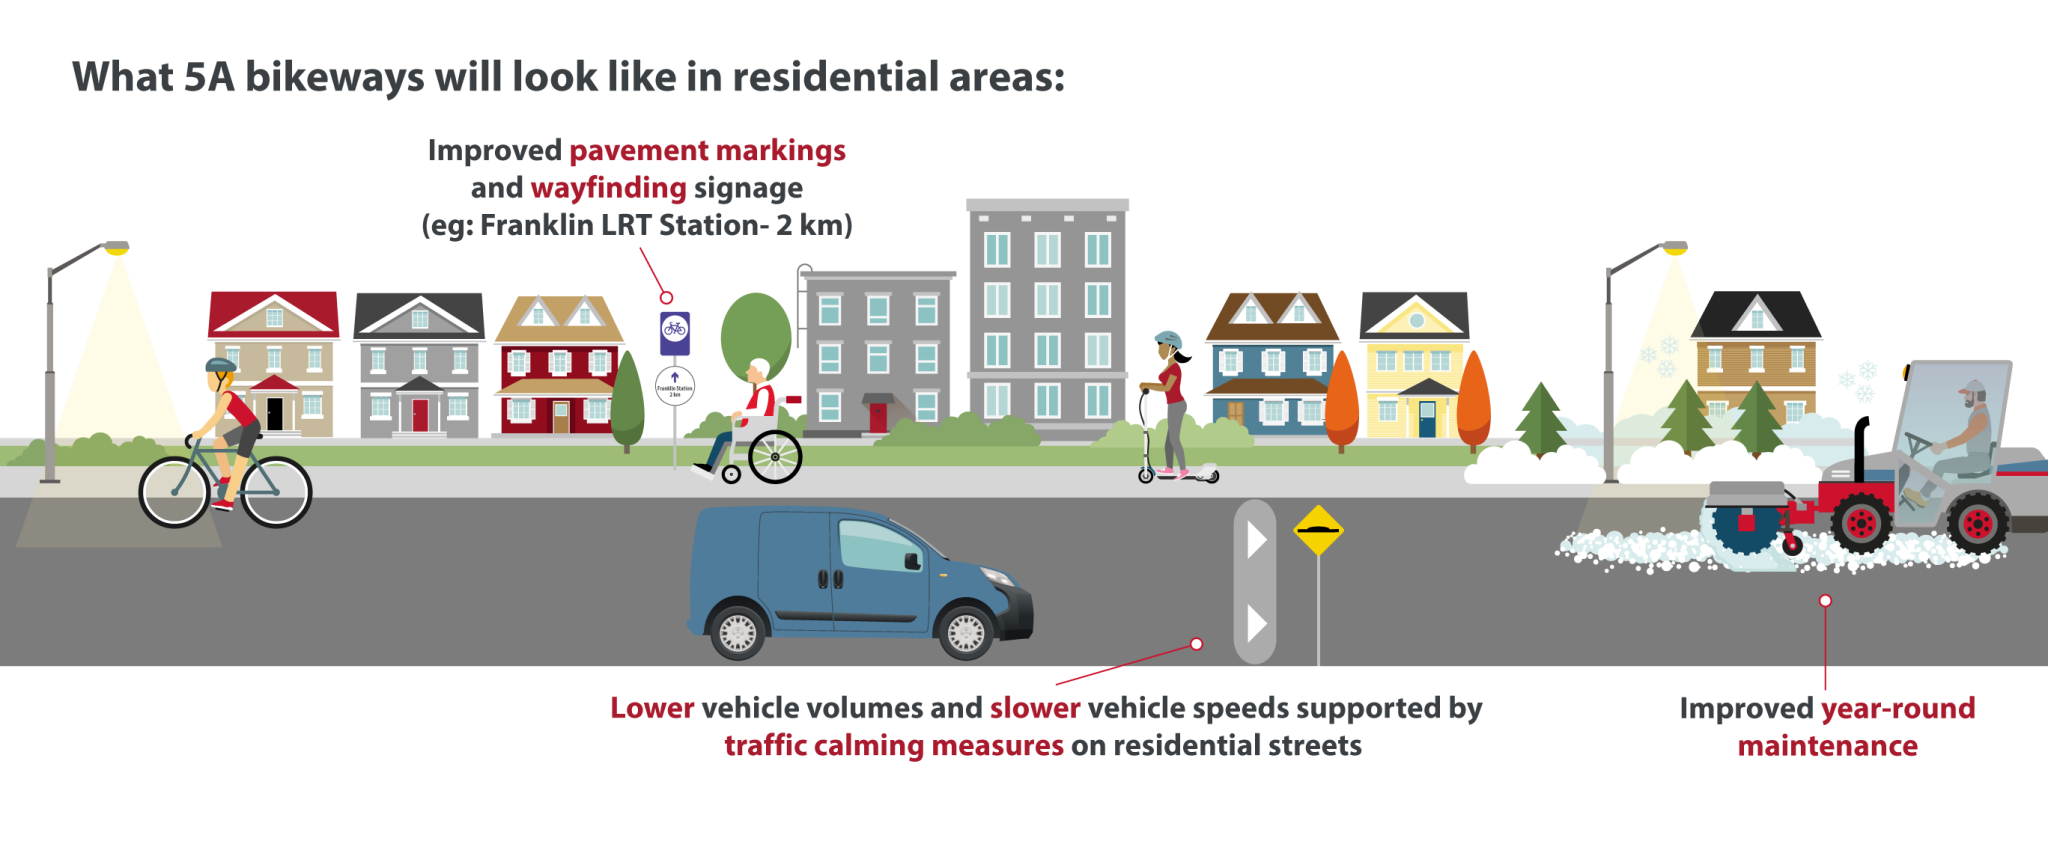 5a-bikeways-residential-areas.png